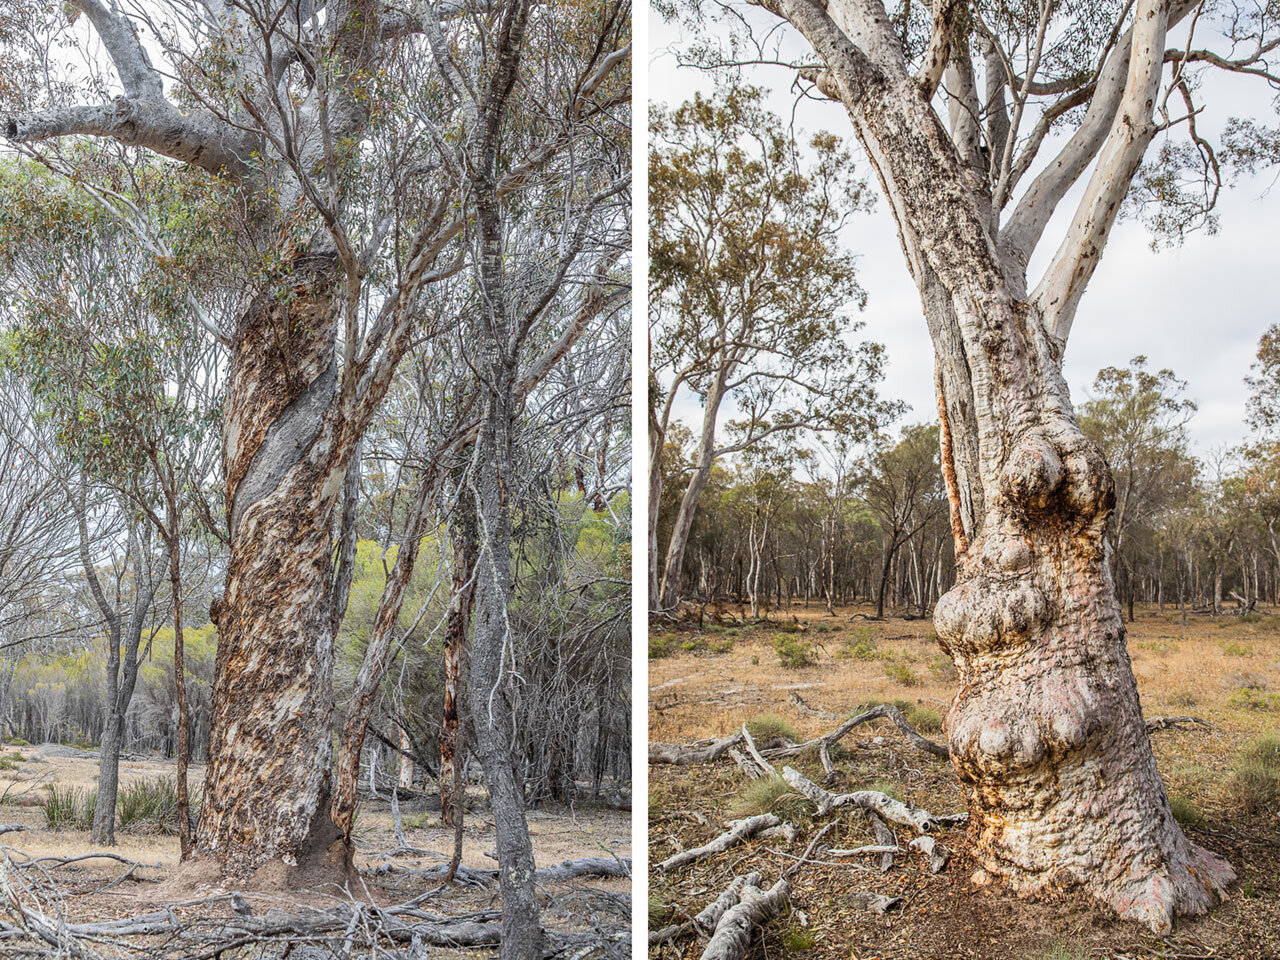 Trees and landscape of the Kojonup Reserve in the Great Southern region of WA